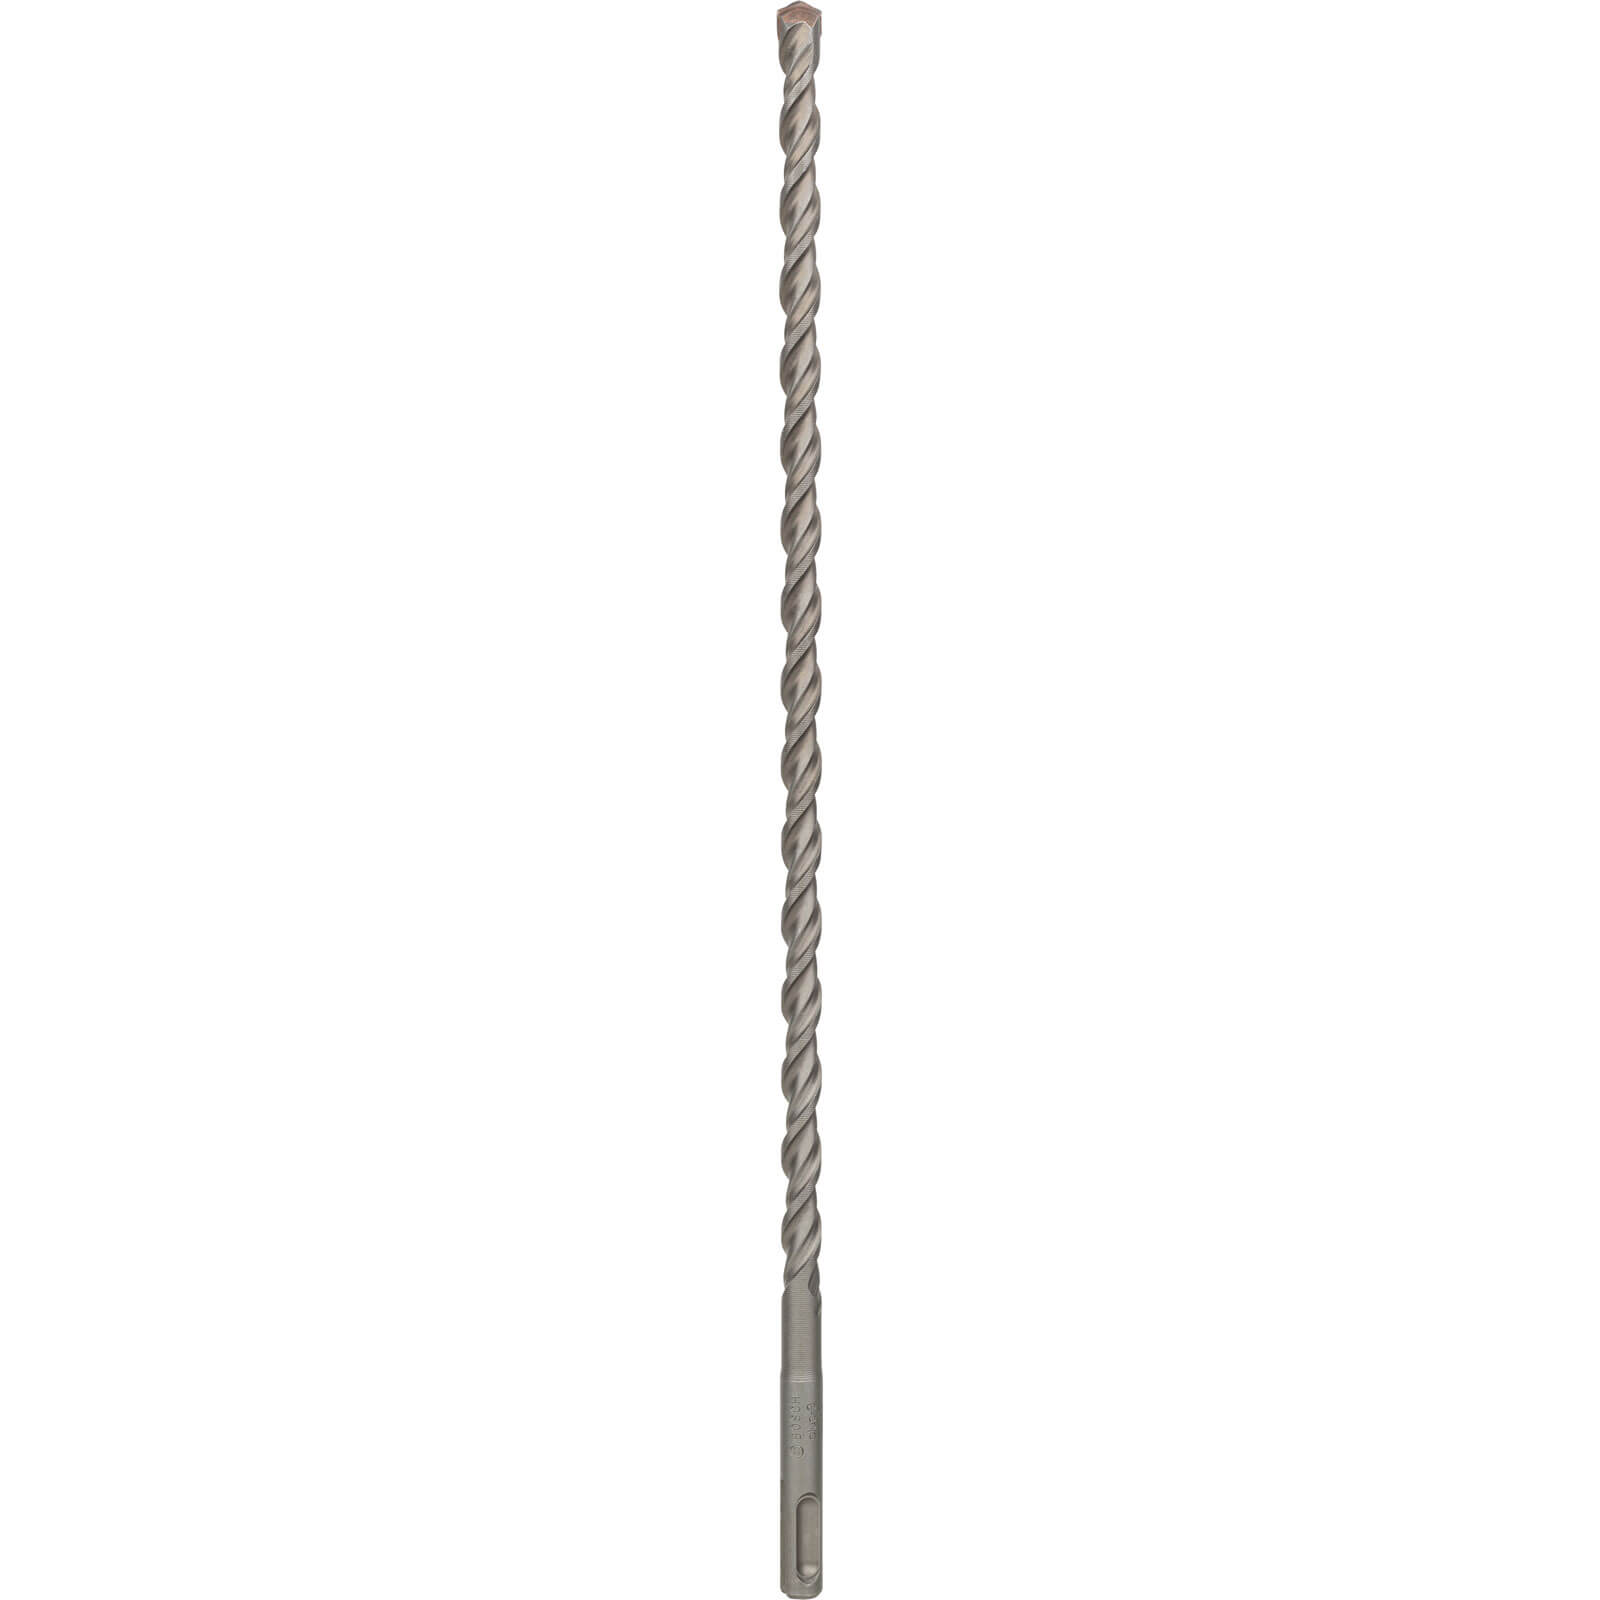 Image of Bosch Series 3 SDS Plus Masonry Drill Bit 10mm 360mm Pack of 1